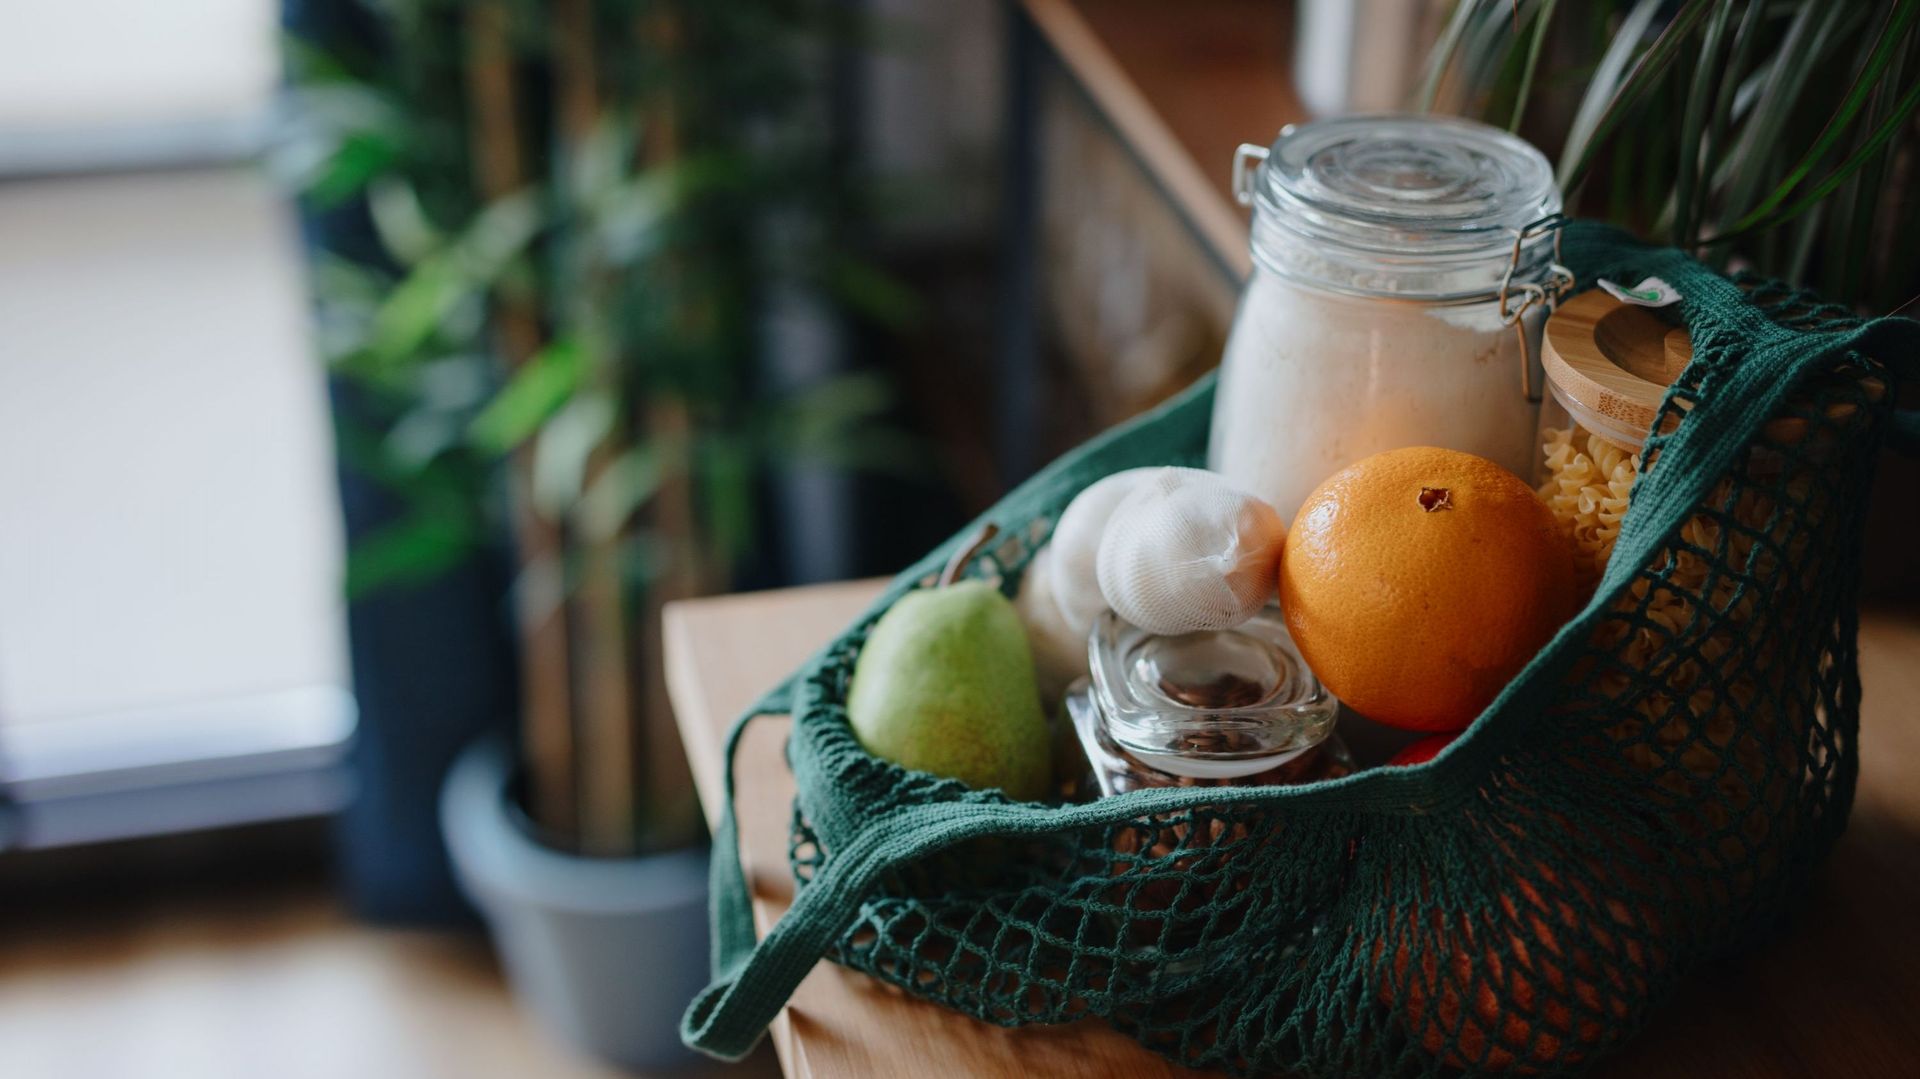 Eco bag on kitchen counter with food in jars and fresh fruits. Zero waste concept